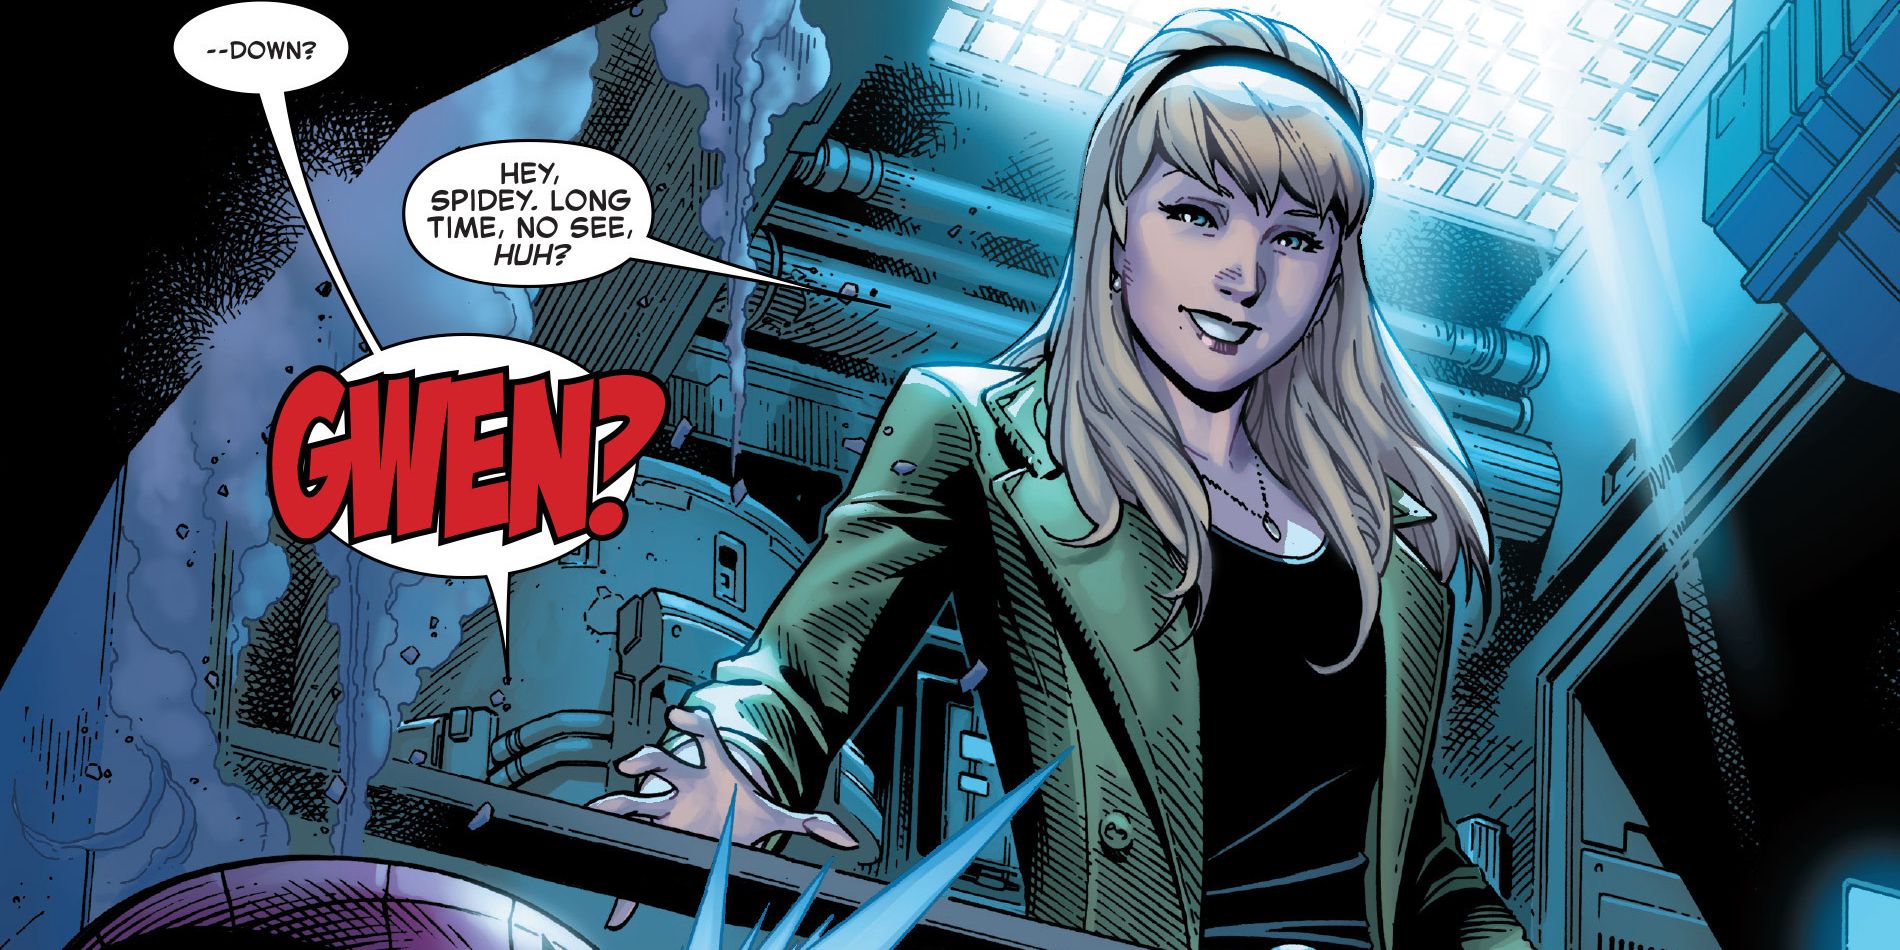 Gwen Stacy's clone shows up.